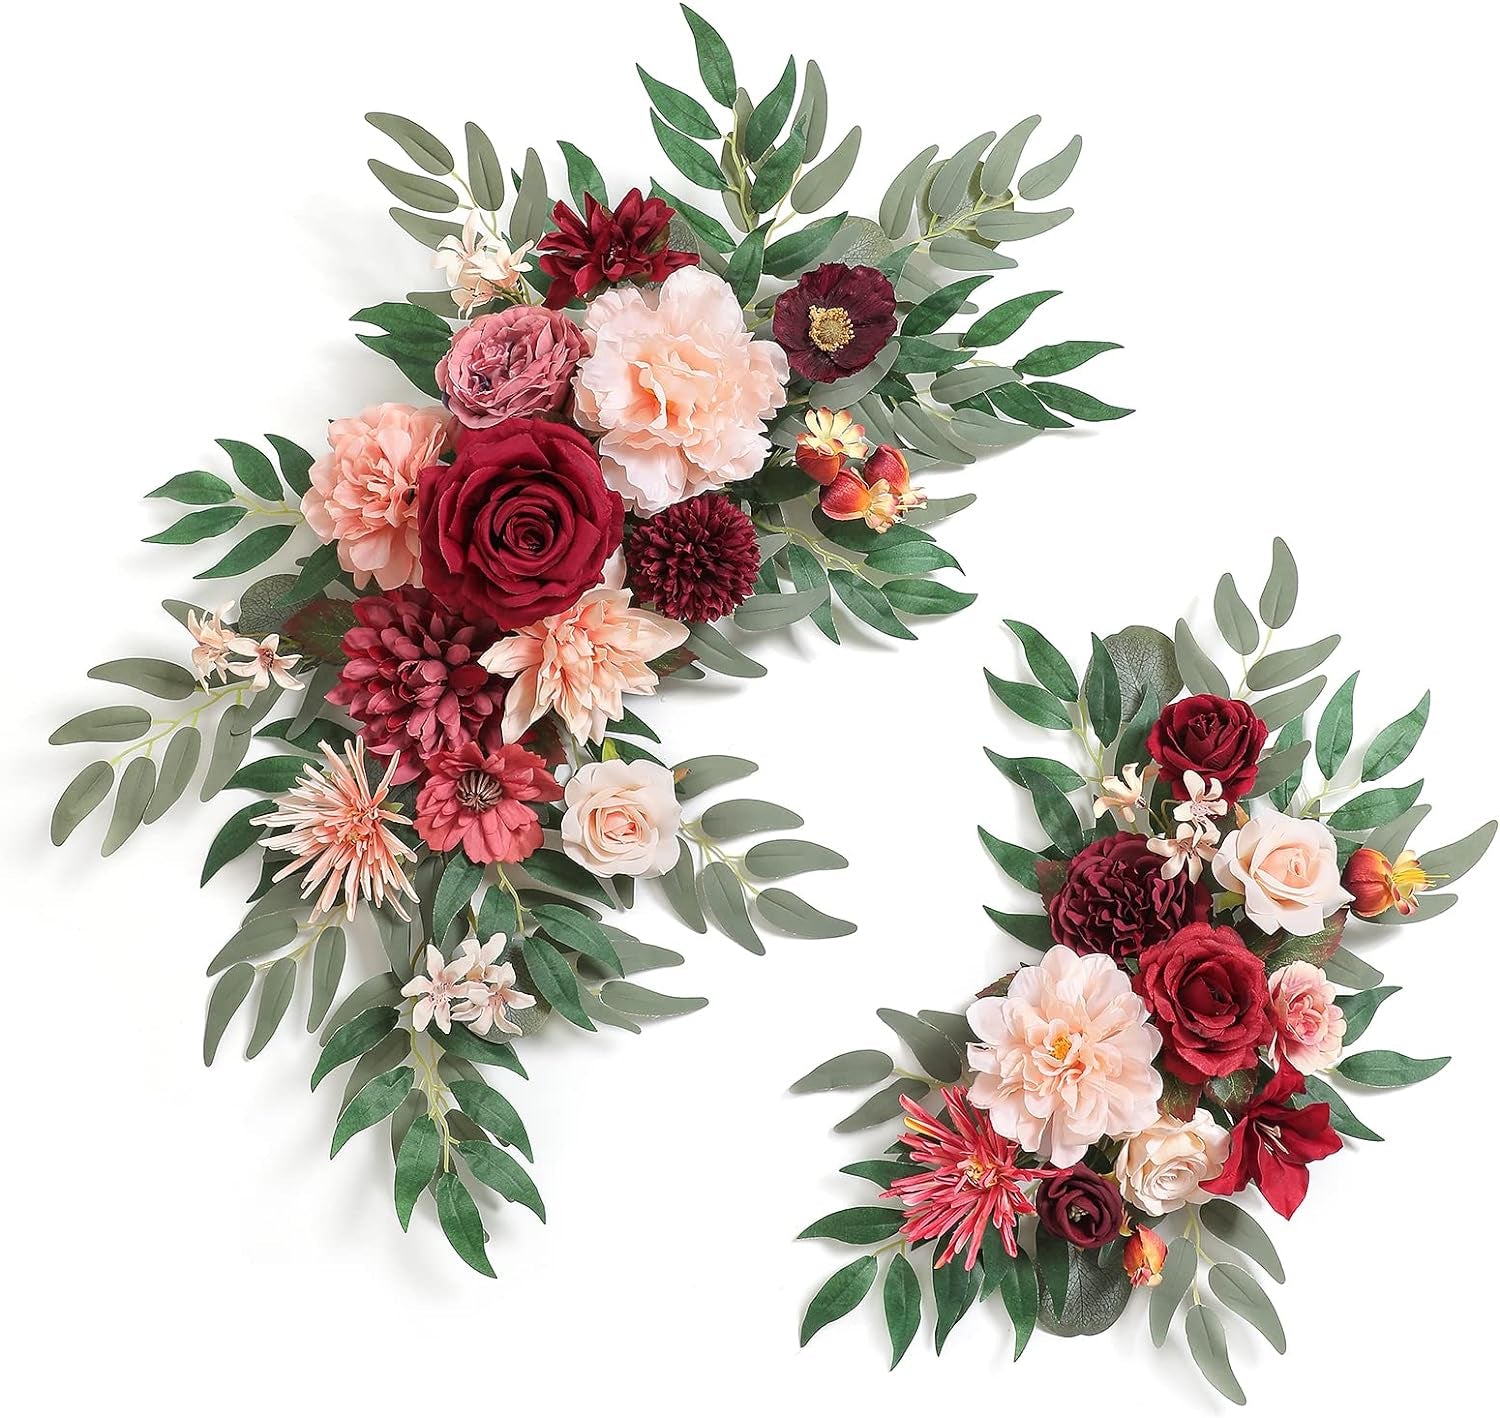 Serra Flora Artificial Flower Swag Wedding Arch Flowers Kit (Pack of 2) for DIY Burgundy Rose Arrangements Party Welcome Ceremony Sign and Reception Backdrop Floral Decoration